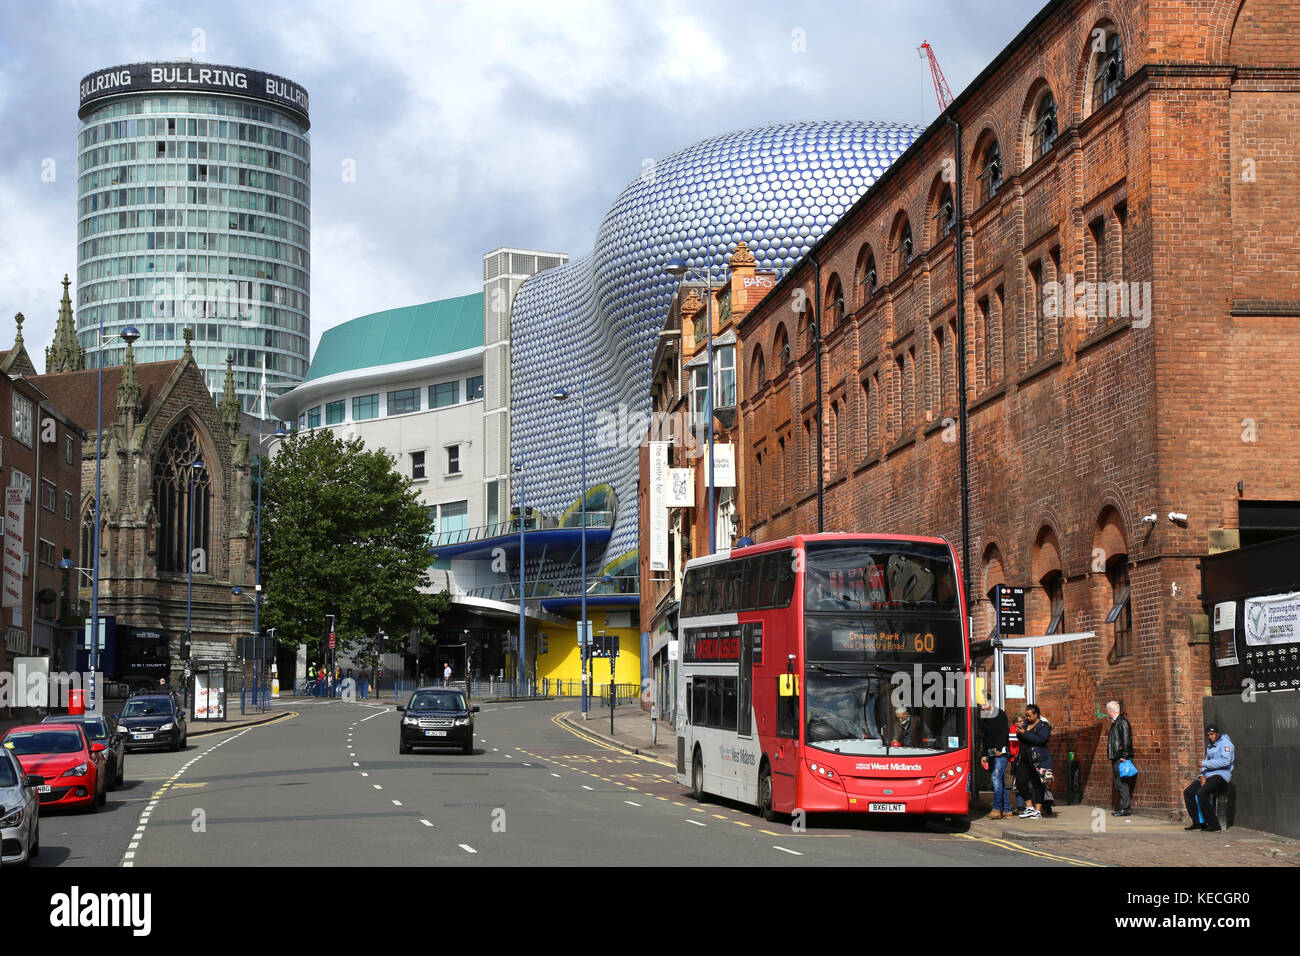 A view along Digbeth, Birmingham, UK, towards the Bullring shopping area of the city centre.  Also visible are the Rotunda and the Selfridges store. Stock Photo